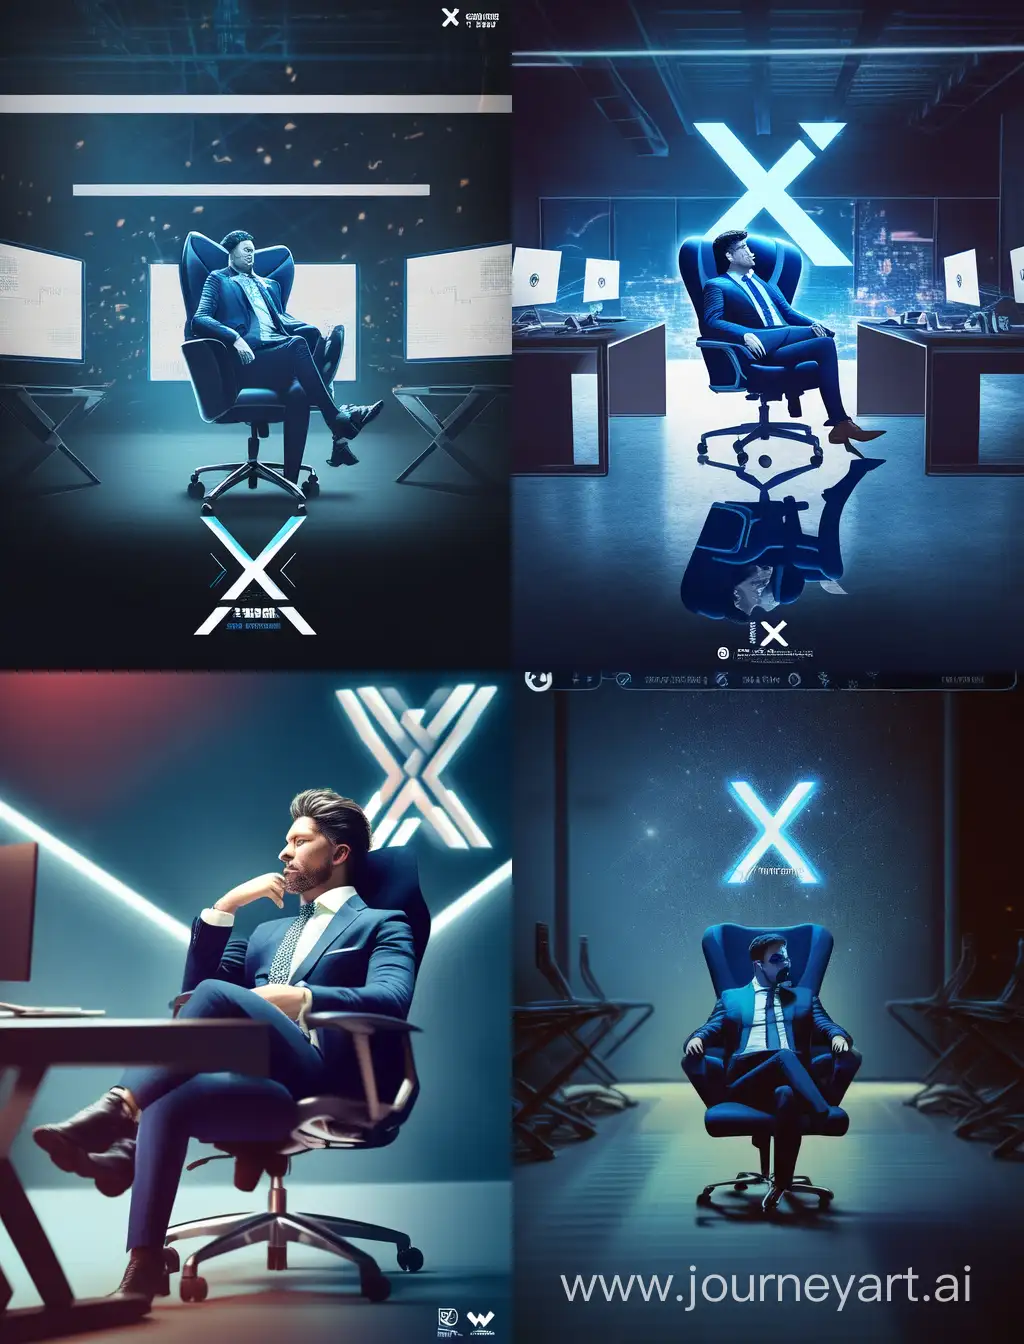 a handsome man sitting in an executive chair, with the logo of a social network "X", dark blue executive suit, his background is a mockup of his X profile, paid with the profile name "Angel", unique appearance and professional design and a profile image, cinematic lighting, 8k.